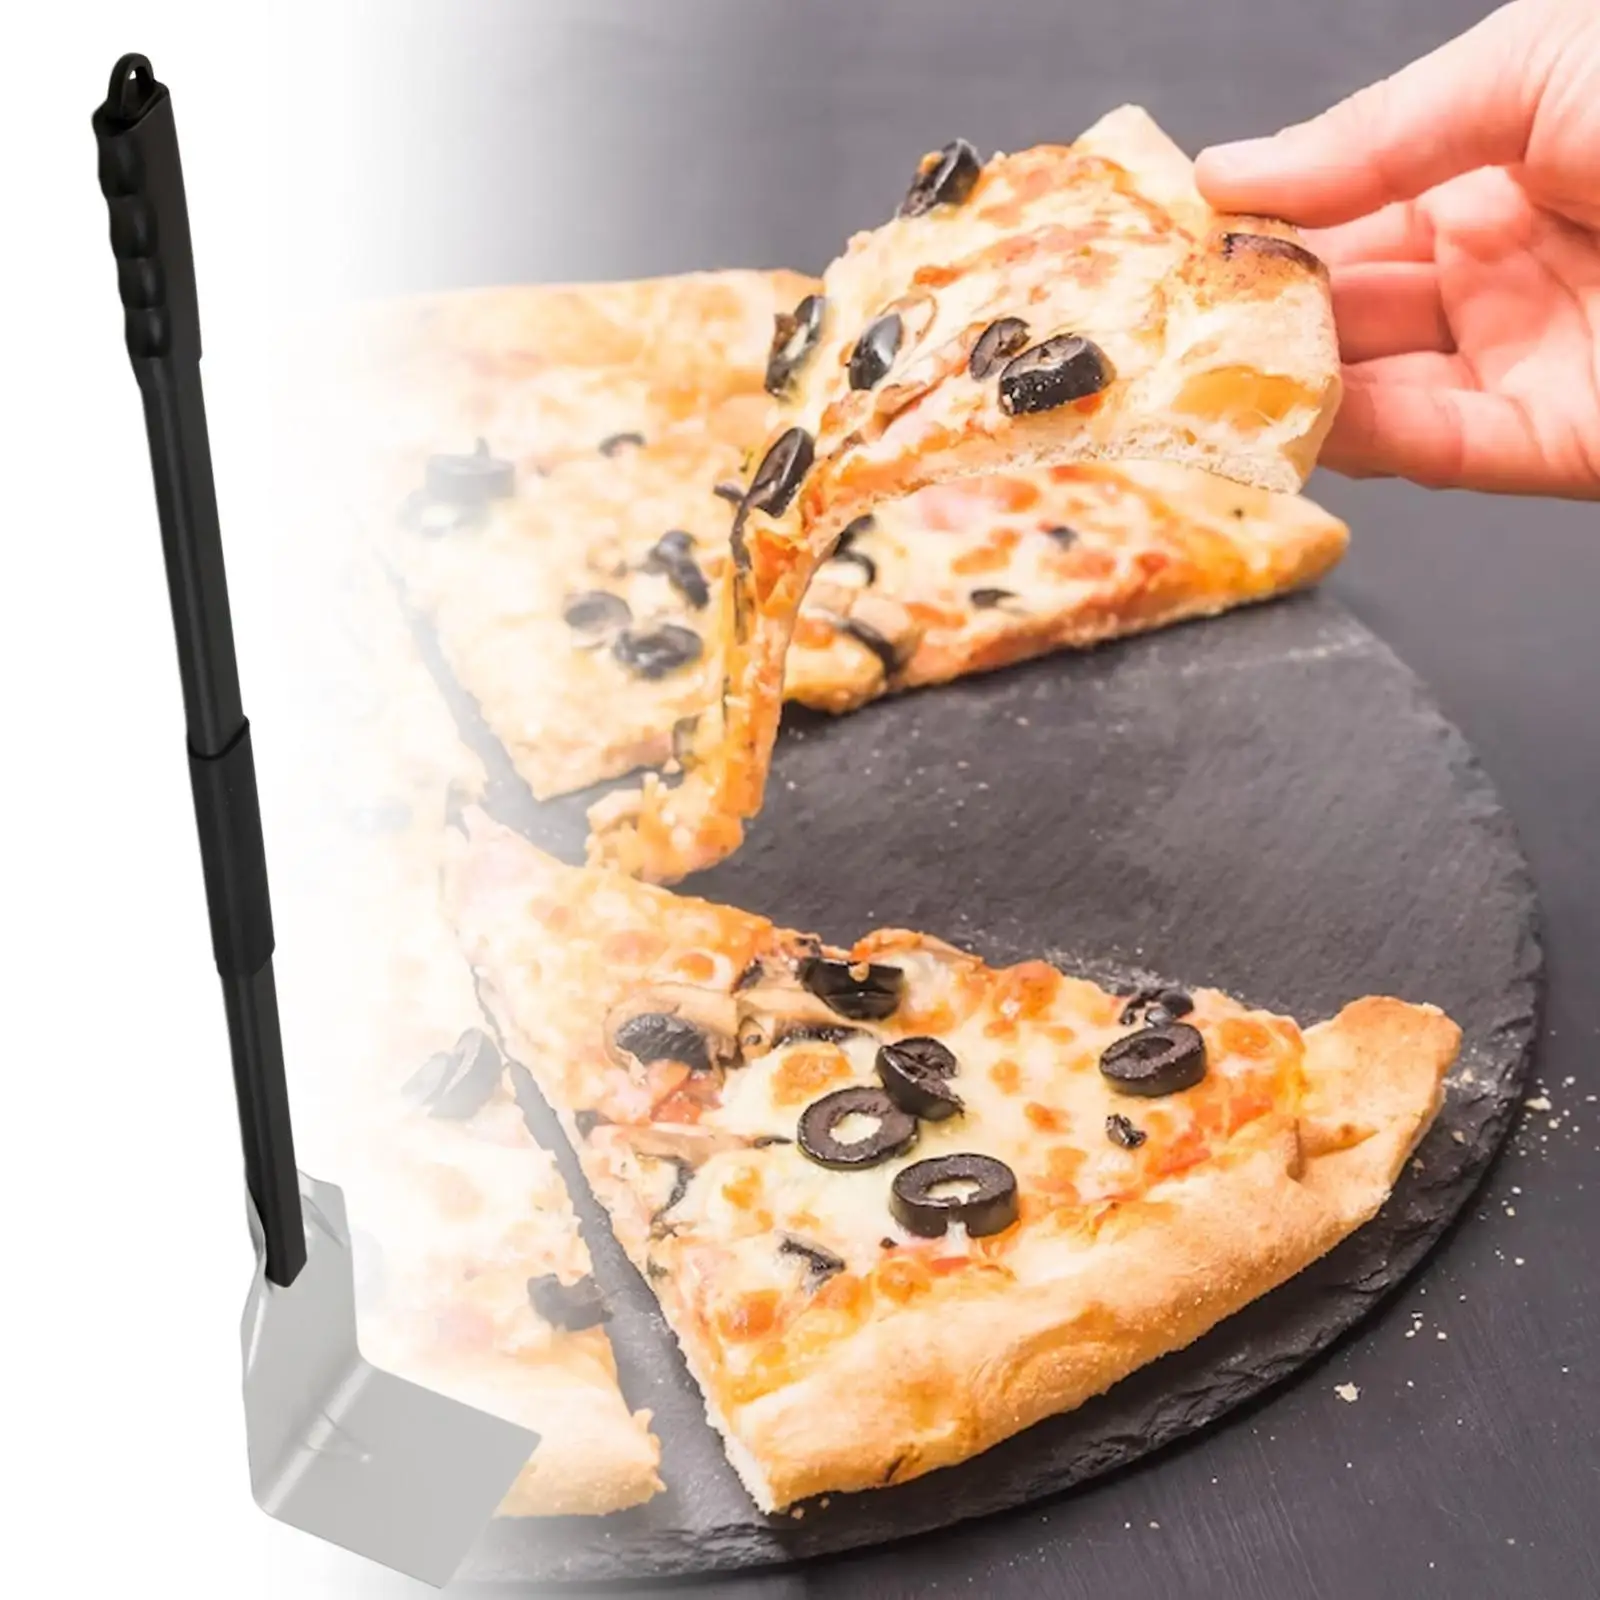 Pizza Oven Cleaning Rake Ash Shovel Scraper Hook Ash Rake Pizza Oven Rake for Fireplaces Outdoor Home Kitchen Tools